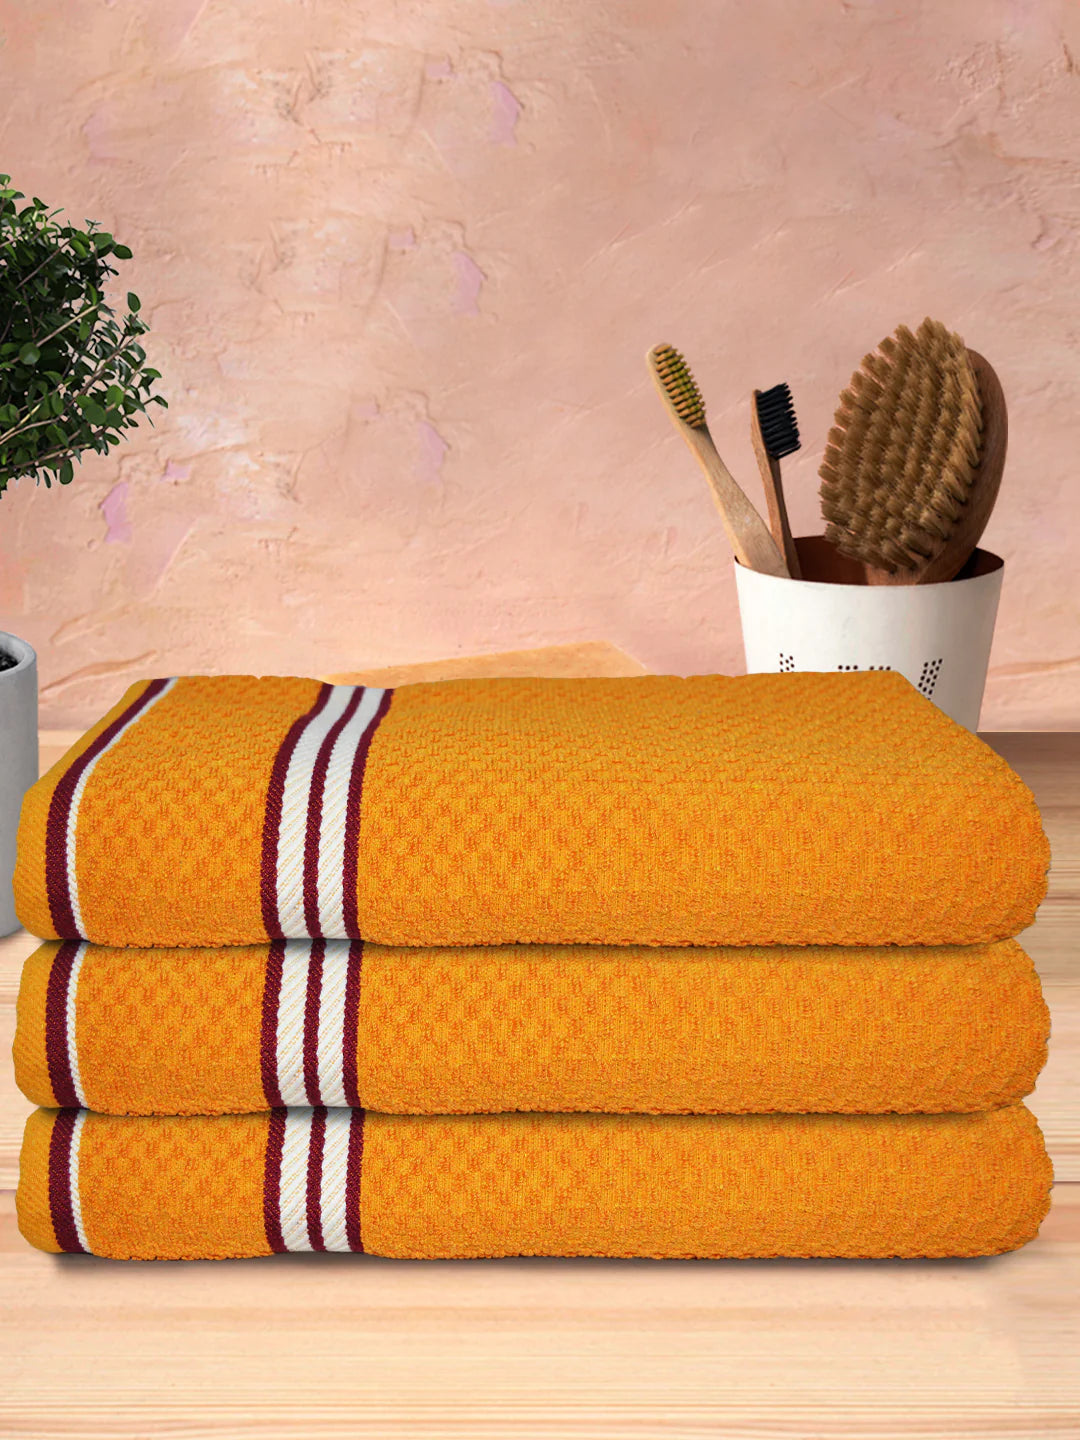 Athom Living Popcorn Textured Solid Bath Towel Yellow 67x137 Cm Pack Of 3